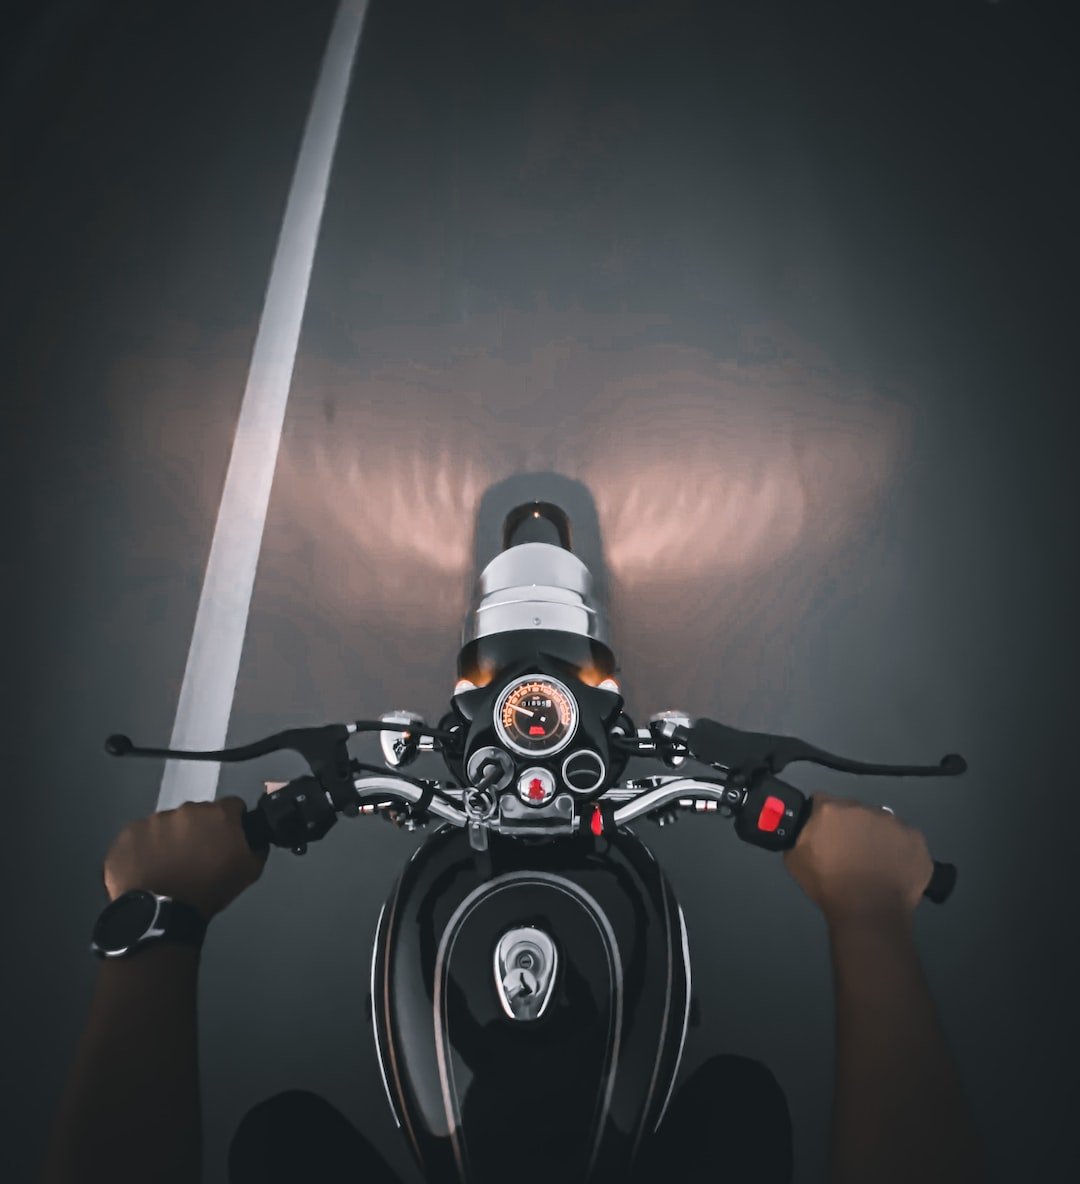 a person riding a motorcycle on a dark street